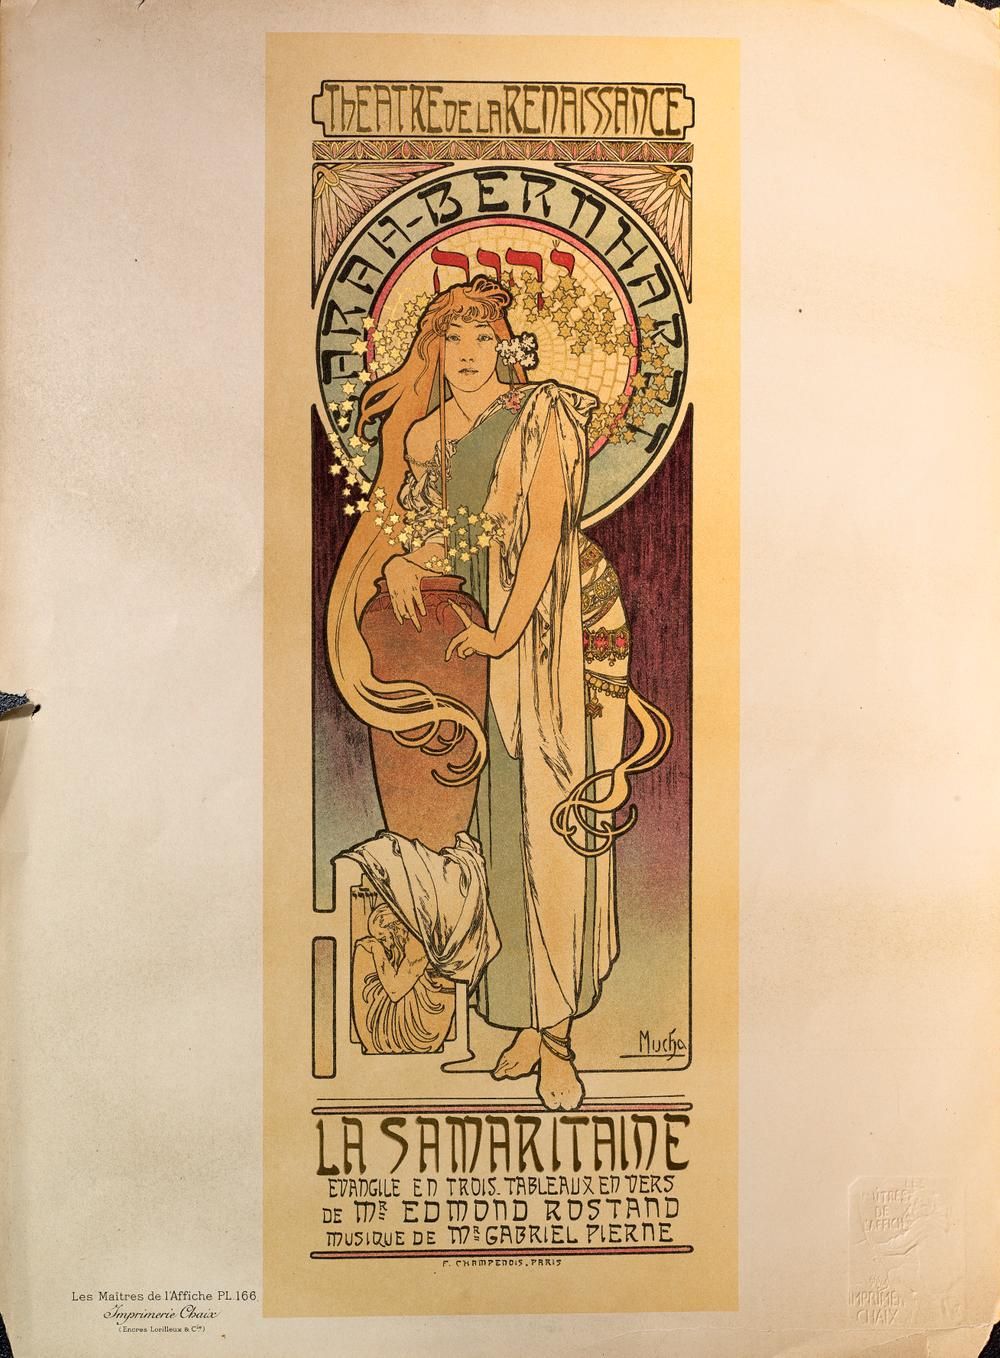 ALPHONSE MUCHA (1860 - 1939) signed in plate ‘Mucha’ (lower right)

lithograph i&hellip;